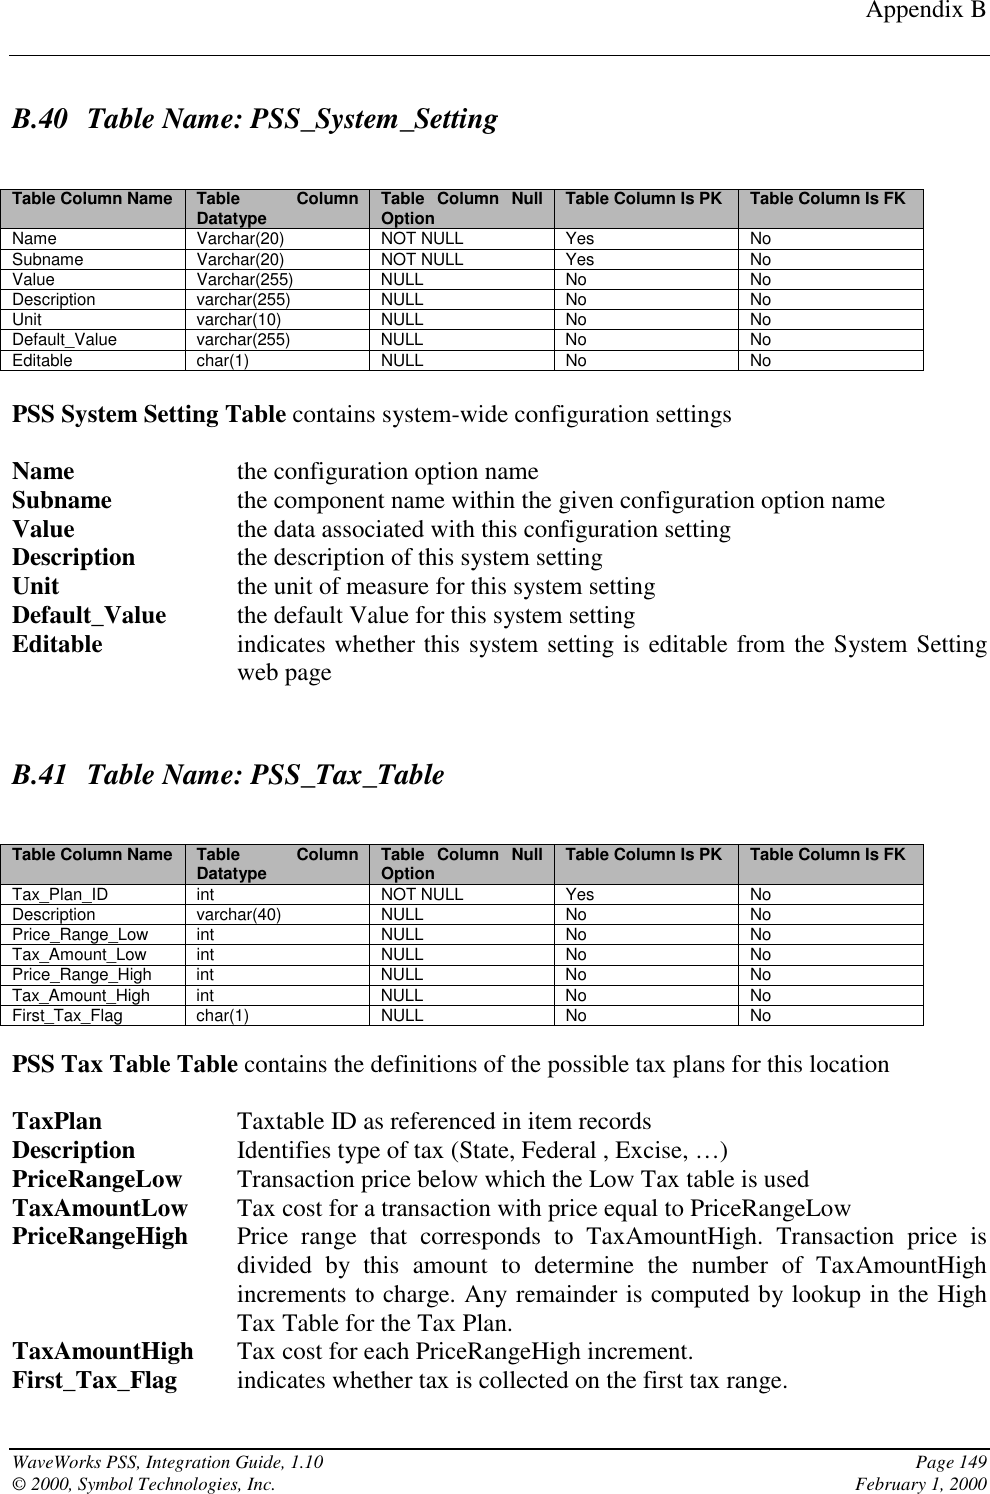 Appendix BWaveWorks PSS, Integration Guide, 1.10 Page 149© 2000, Symbol Technologies, Inc. February 1, 2000B.40 Table Name: PSS_System_SettingTable Column Name Table ColumnDatatype Table Column NullOption Table Column Is PK Table Column Is FKName Varchar(20) NOT NULL Yes NoSubname Varchar(20) NOT NULL Yes NoValue Varchar(255) NULL No NoDescription varchar(255) NULL No NoUnit varchar(10) NULL No NoDefault_Value varchar(255) NULL No NoEditable char(1) NULL No NoPSS System Setting Table contains system-wide configuration settingsName the configuration option nameSubname the component name within the given configuration option nameValue the data associated with this configuration settingDescription the description of this system settingUnit the unit of measure for this system settingDefault_Value the default Value for this system settingEditable indicates whether this system setting is editable from the System Settingweb pageB.41 Table Name: PSS_Tax_TableTable Column Name Table ColumnDatatype Table Column NullOption Table Column Is PK Table Column Is FKTax_Plan_ID int NOT NULL Yes NoDescription varchar(40) NULL No NoPrice_Range_Low int NULL No NoTax_Amount_Low int NULL No NoPrice_Range_High int NULL No NoTax_Amount_High int NULL No NoFirst_Tax_Flag char(1) NULL No NoPSS Tax Table Table contains the definitions of the possible tax plans for this locationTaxPlan Taxtable ID as referenced in item recordsDescription Identifies type of tax (State, Federal , Excise, …)PriceRangeLow Transaction price below which the Low Tax table is usedTaxAmountLow Tax cost for a transaction with price equal to PriceRangeLowPriceRangeHigh Price range that corresponds to TaxAmountHigh. Transaction price isdivided by this amount to determine the number of TaxAmountHighincrements to charge. Any remainder is computed by lookup in the HighTax Table for the Tax Plan.TaxAmountHigh Tax cost for each PriceRangeHigh increment.First_Tax_Flag indicates whether tax is collected on the first tax range.